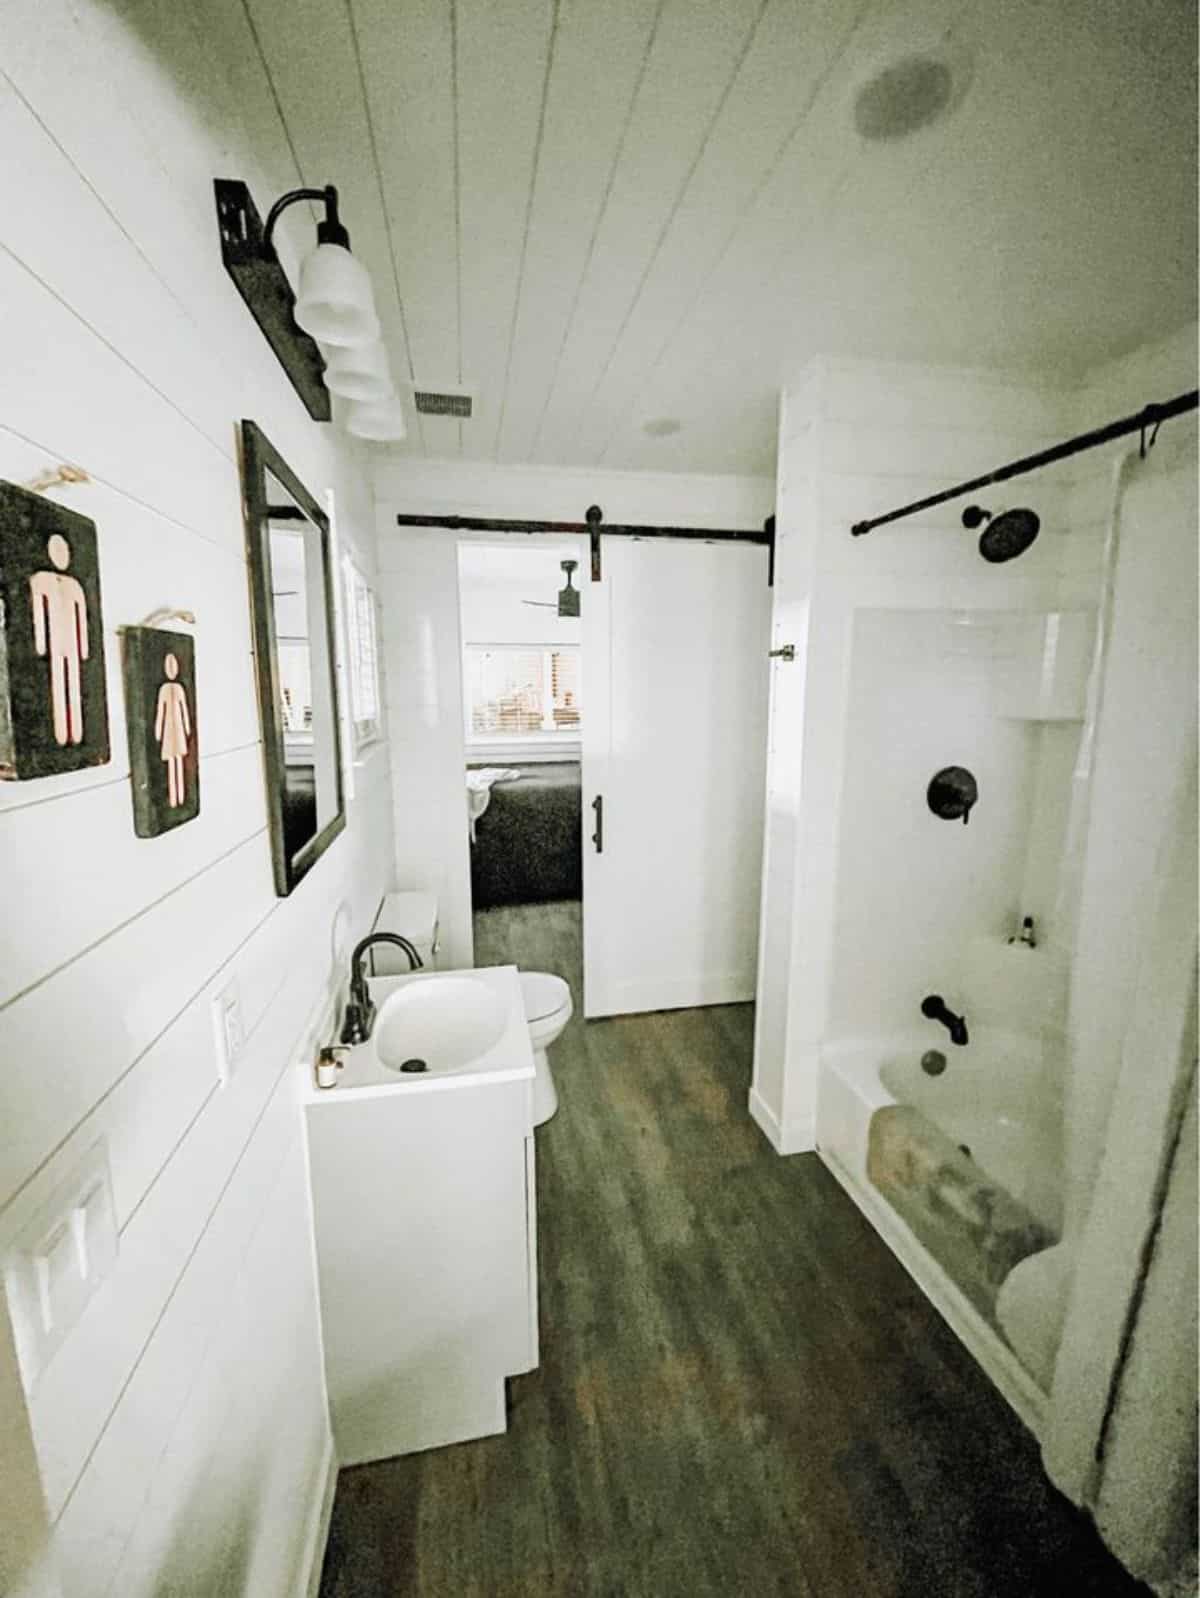 bathroom of move-in ready tiny home has a bath tub and all standard fittings